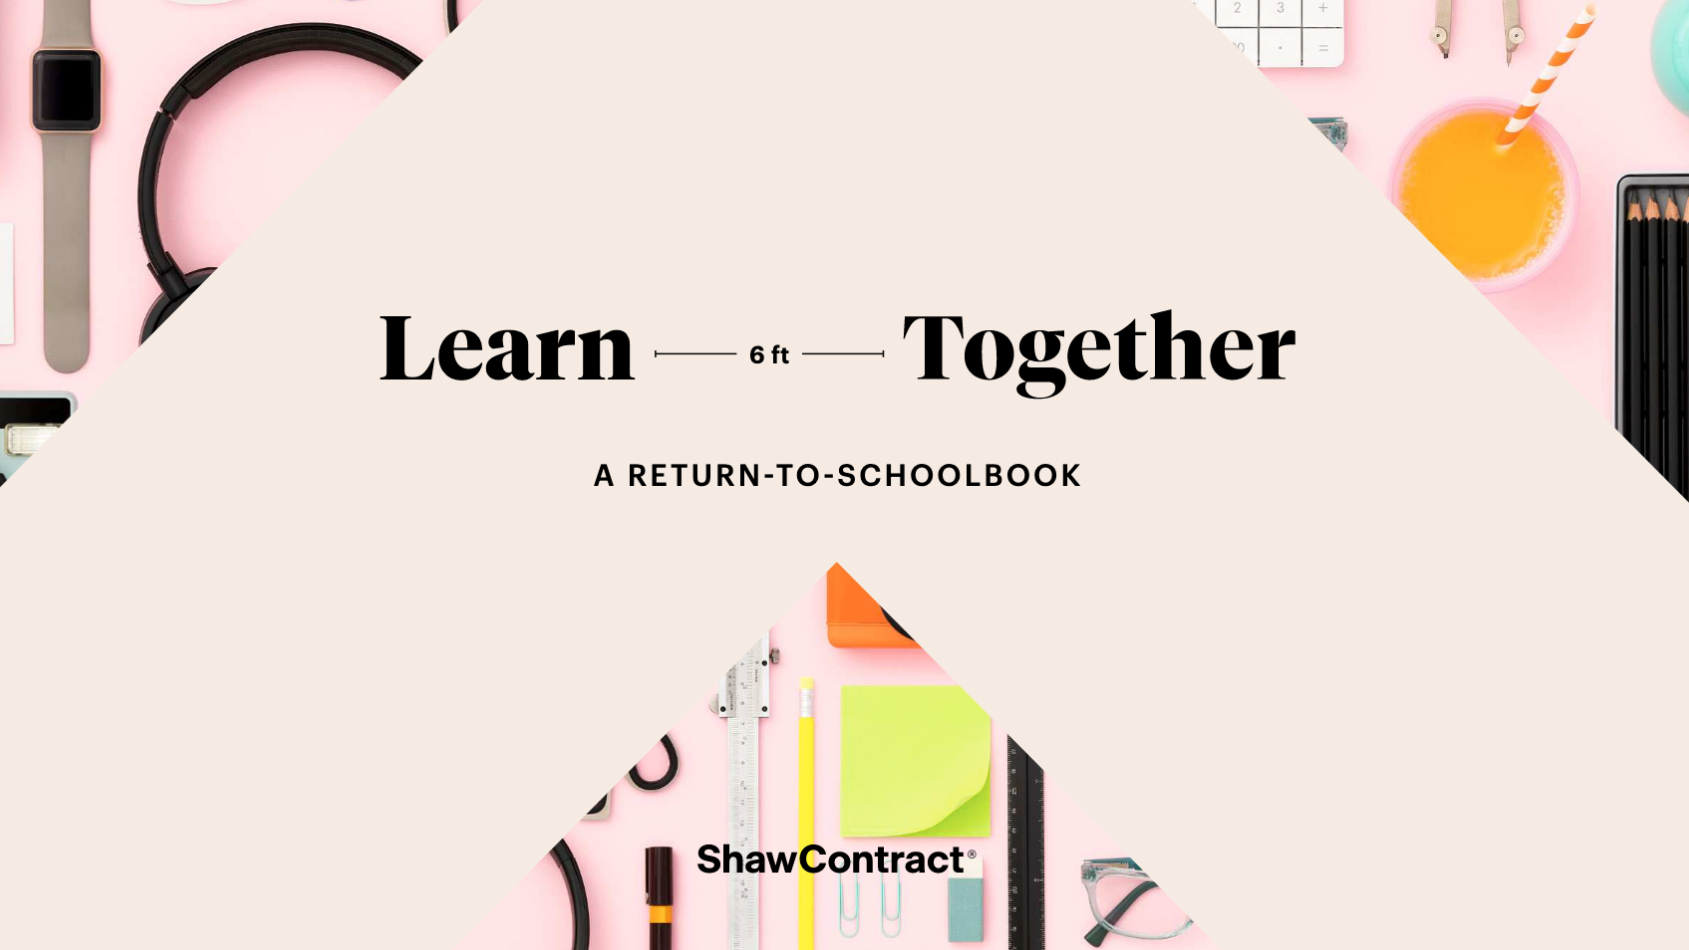 shaw-contract-return-to-school-book